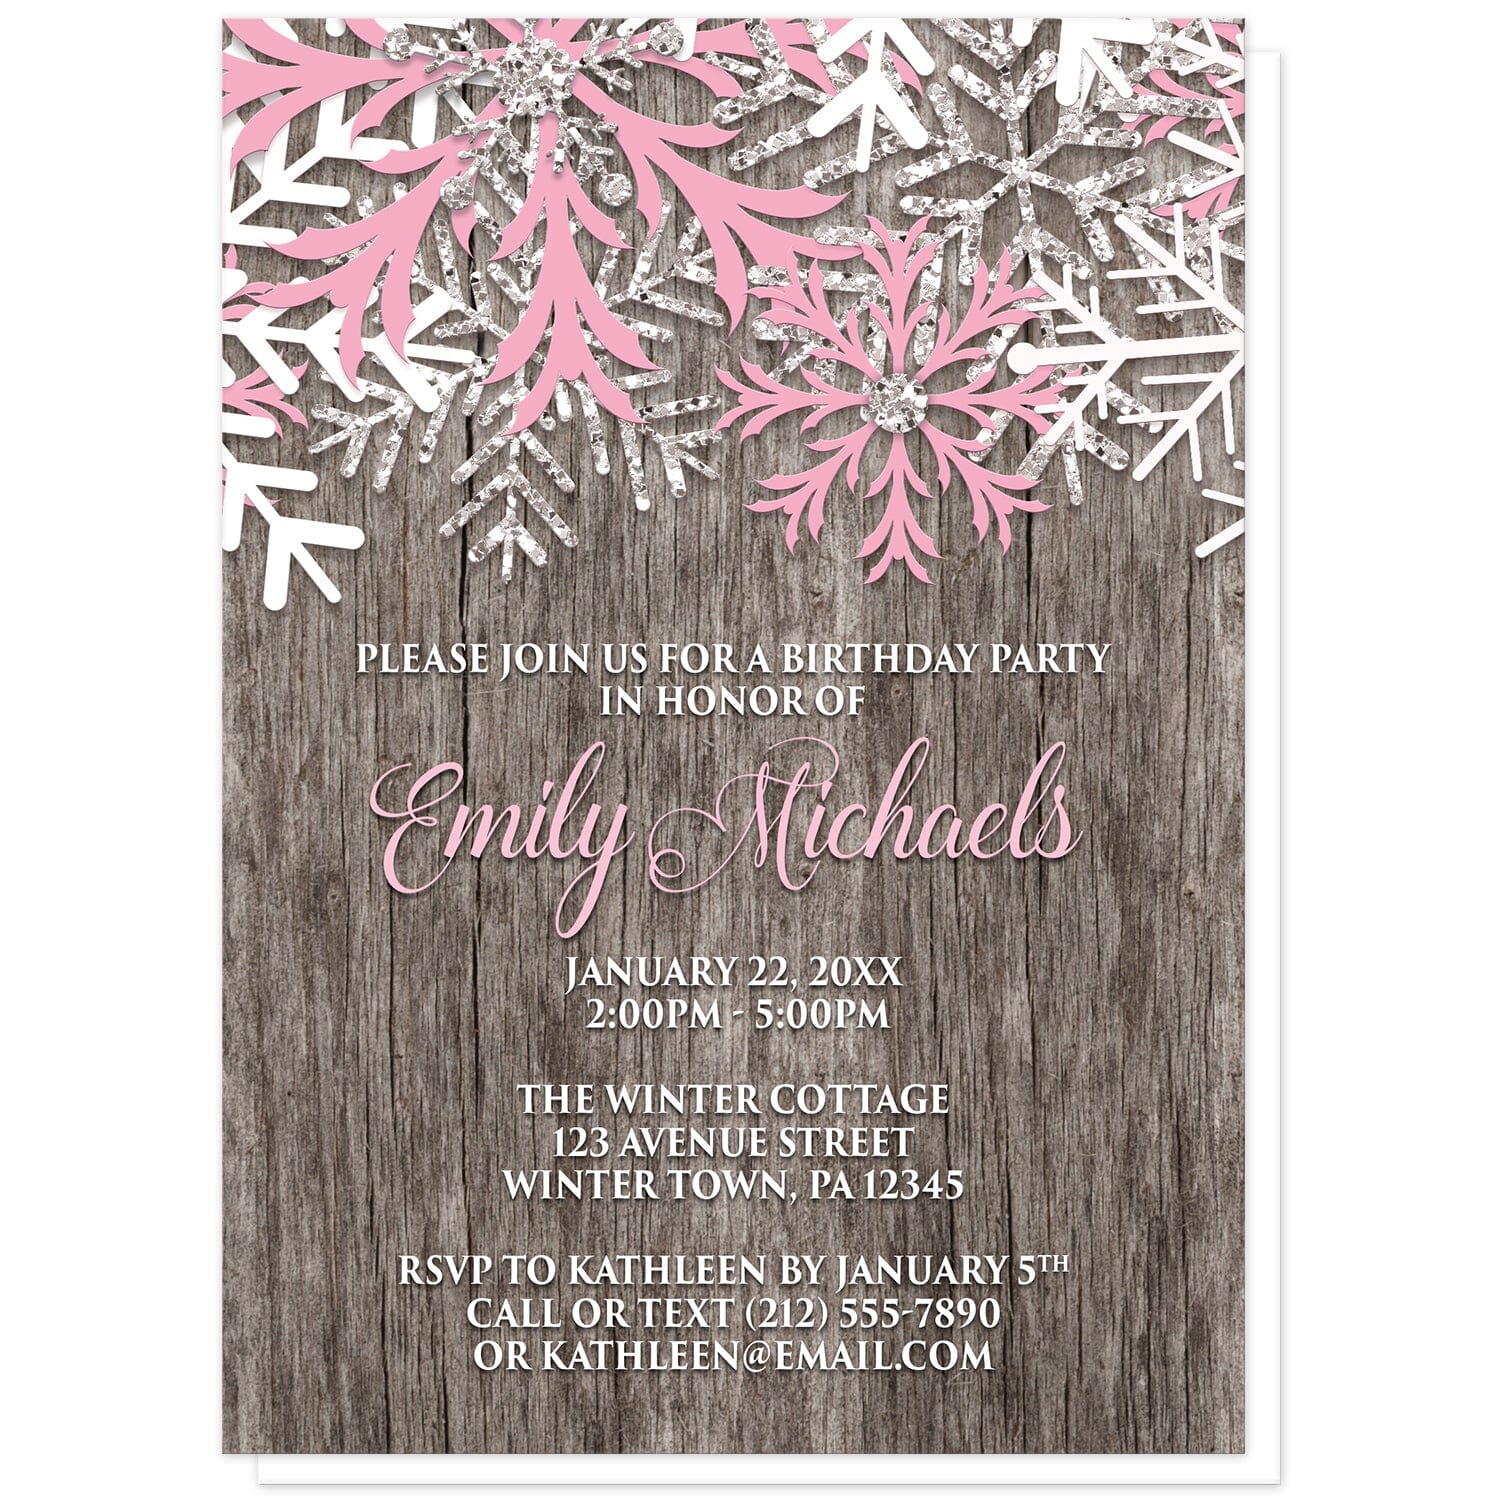 Rustic Winter Wood Pink Snowflake Birthday Invitations at Artistically Invited. Country-inspired rustic winter wood pink snowflake birthday invitations designed with pink, white, and silver-colored glitter-illustrated snowflakes along the top over a rustic wood pattern illustration. Your personalized birthday party details are custom printed in pink and white over the wood background below the snowflakes.